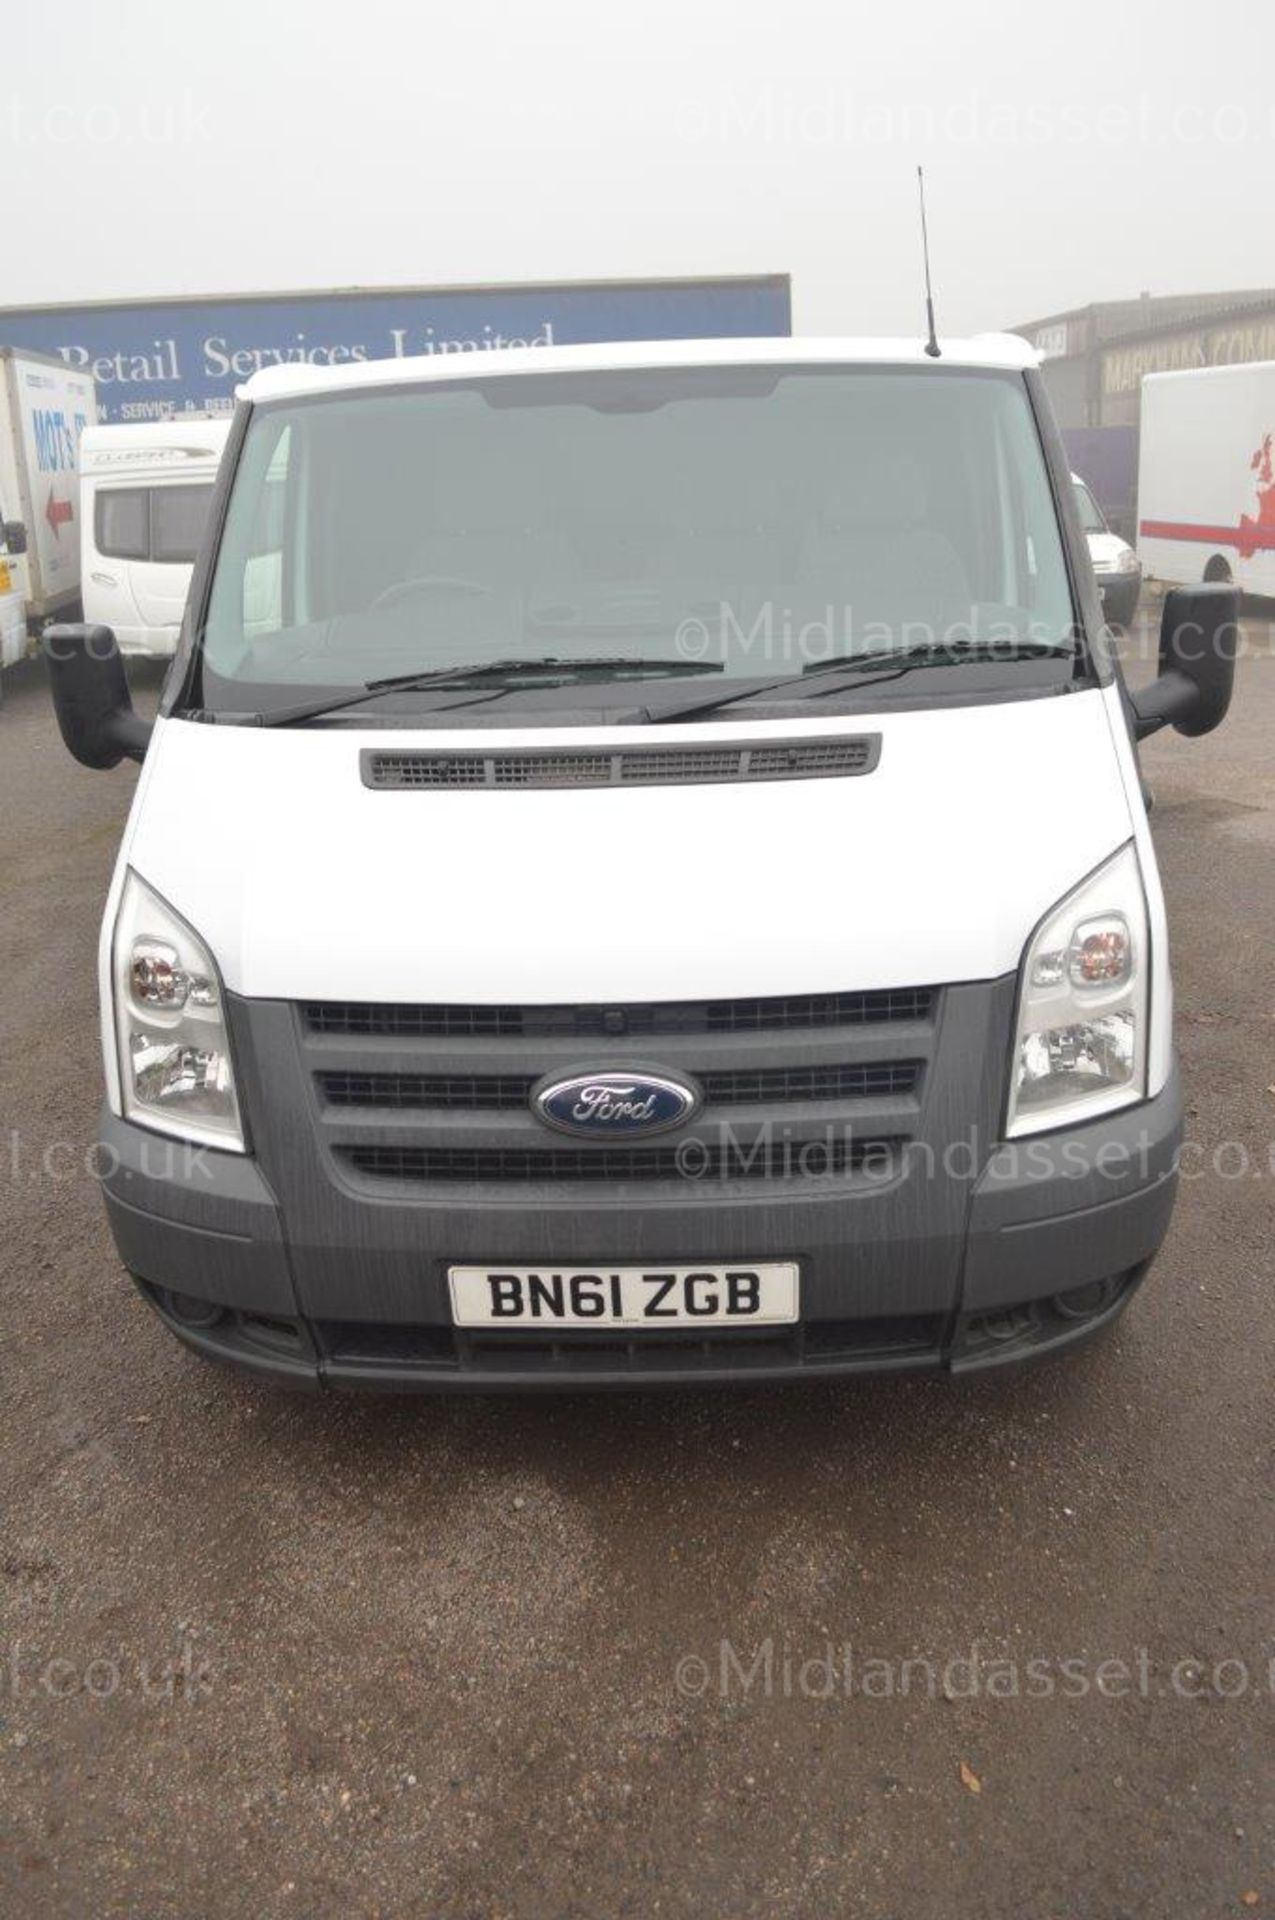 2011/61 REG FORD TRANSIT 85 T280M FWD PANEL VAN ONE OWNER FULL SERVICE HISTORY - Image 3 of 15